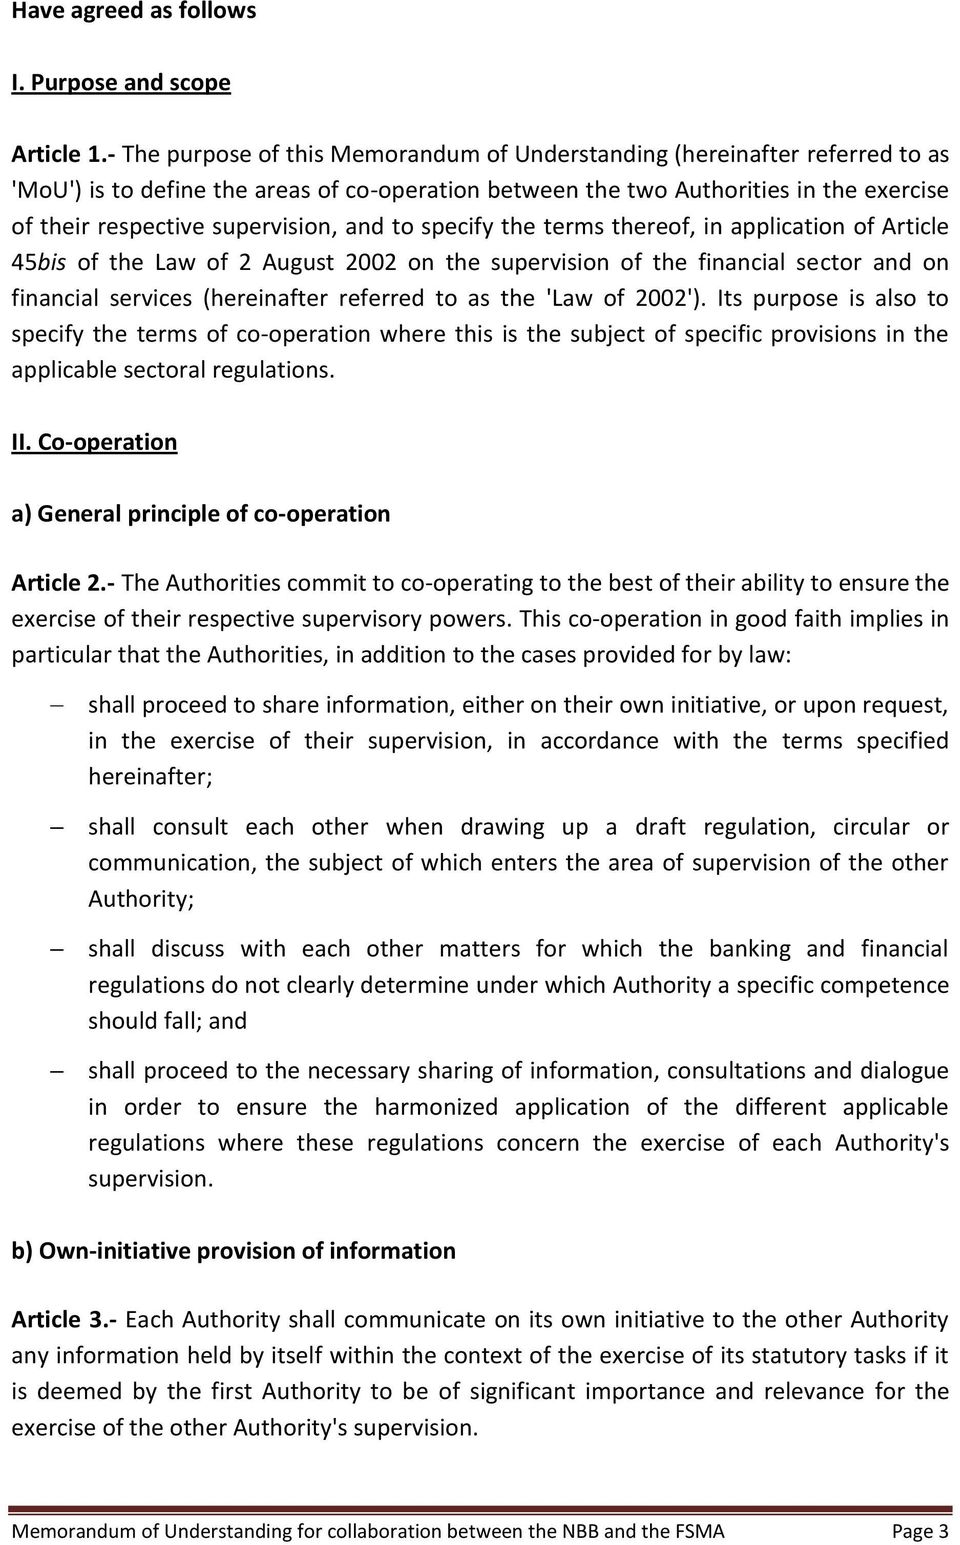 supervision, and to specify the terms thereof, in application of Article 45bis of the Law of 2 August 2002 on the supervision of the financial sector and on financial services (hereinafter referred